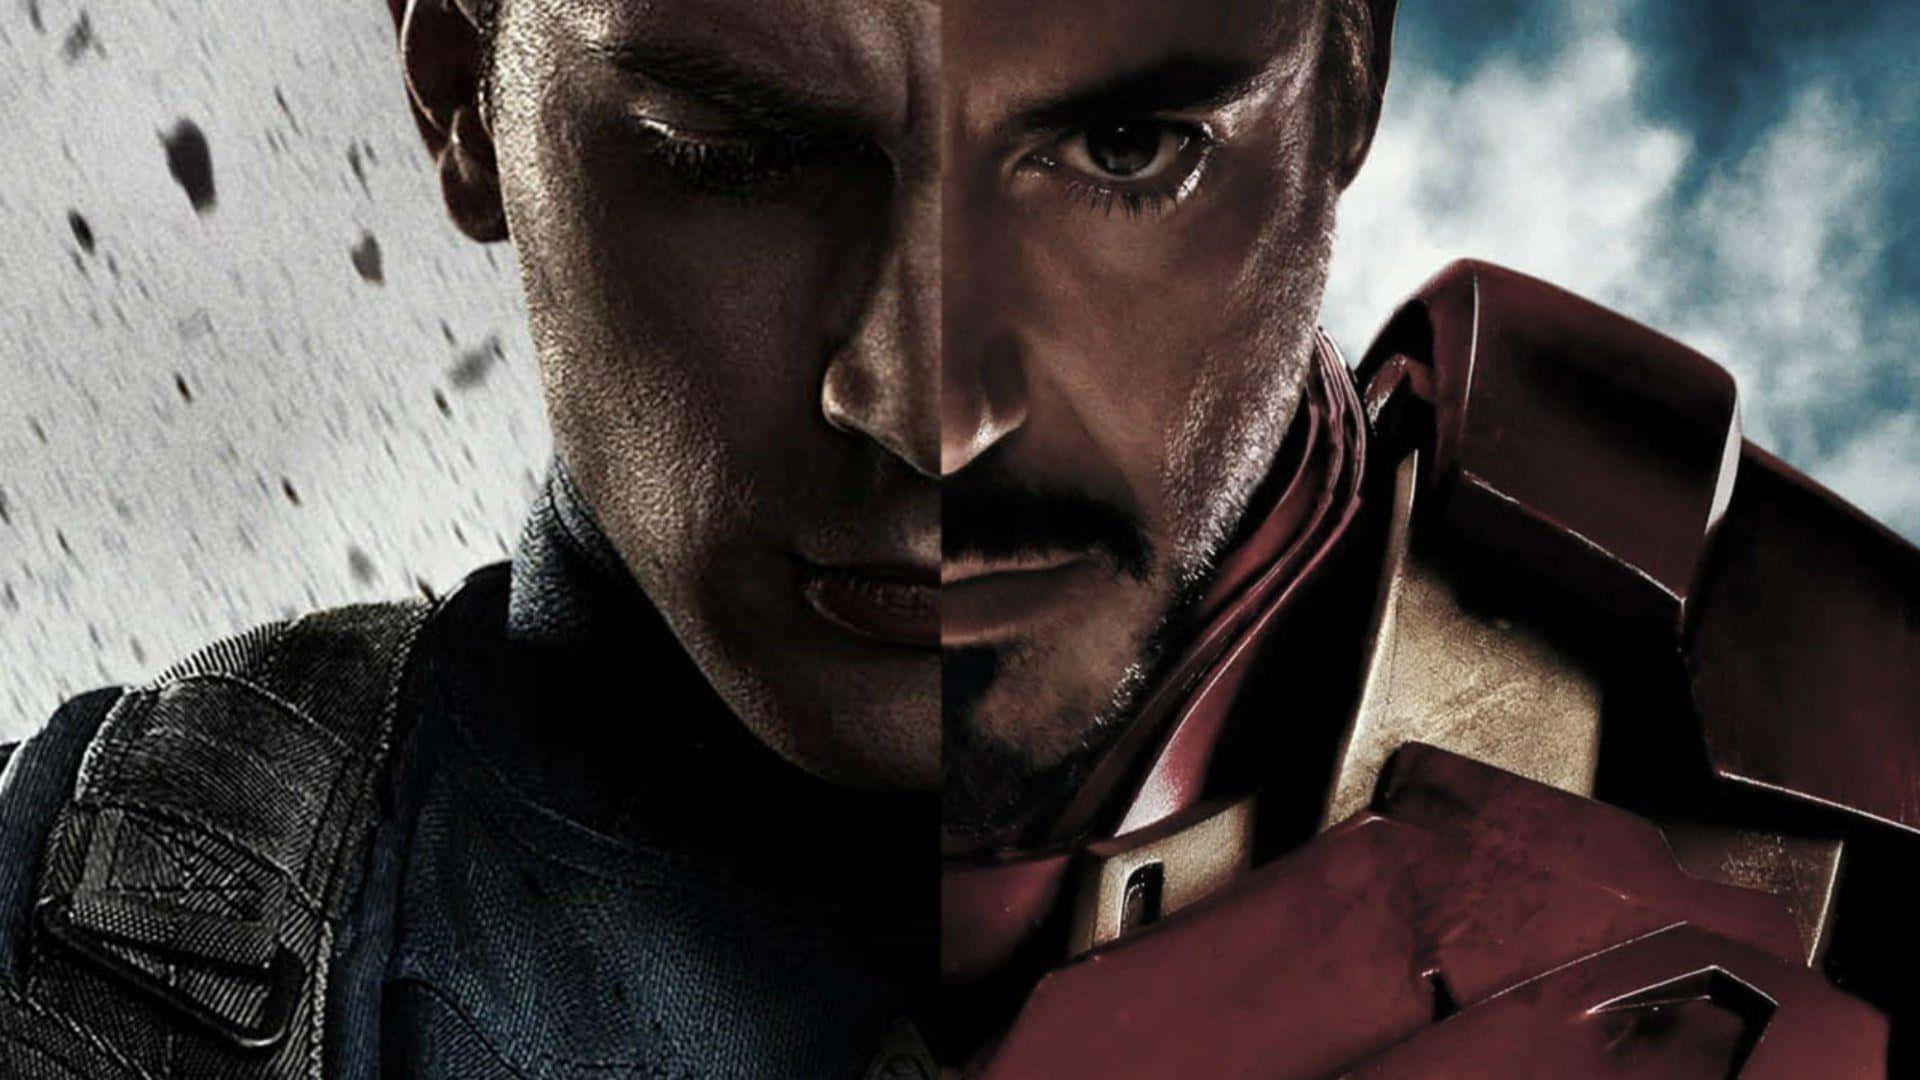 The Legendary Clash Between Iron Man and Captain America" Wallpaper